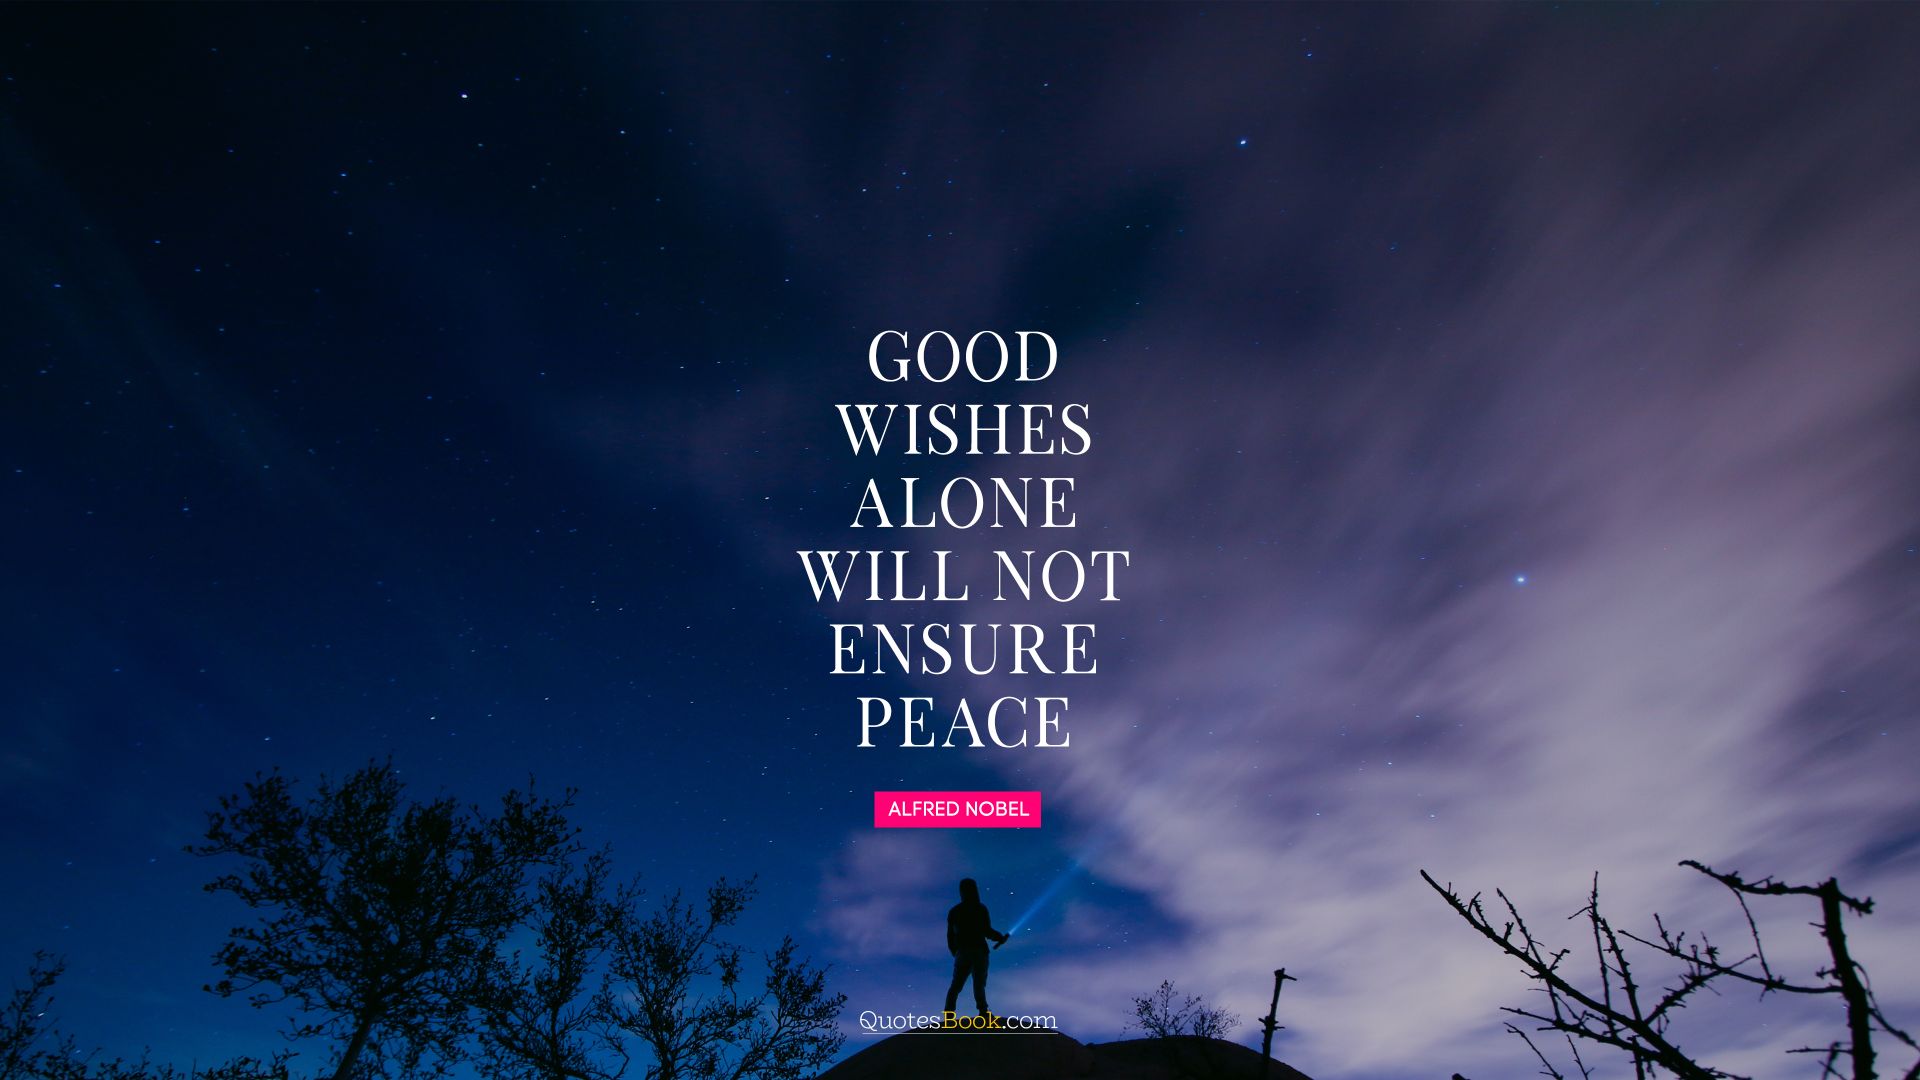 Good wishes alone will not ensure peace. - Quote by Alfred Nobel